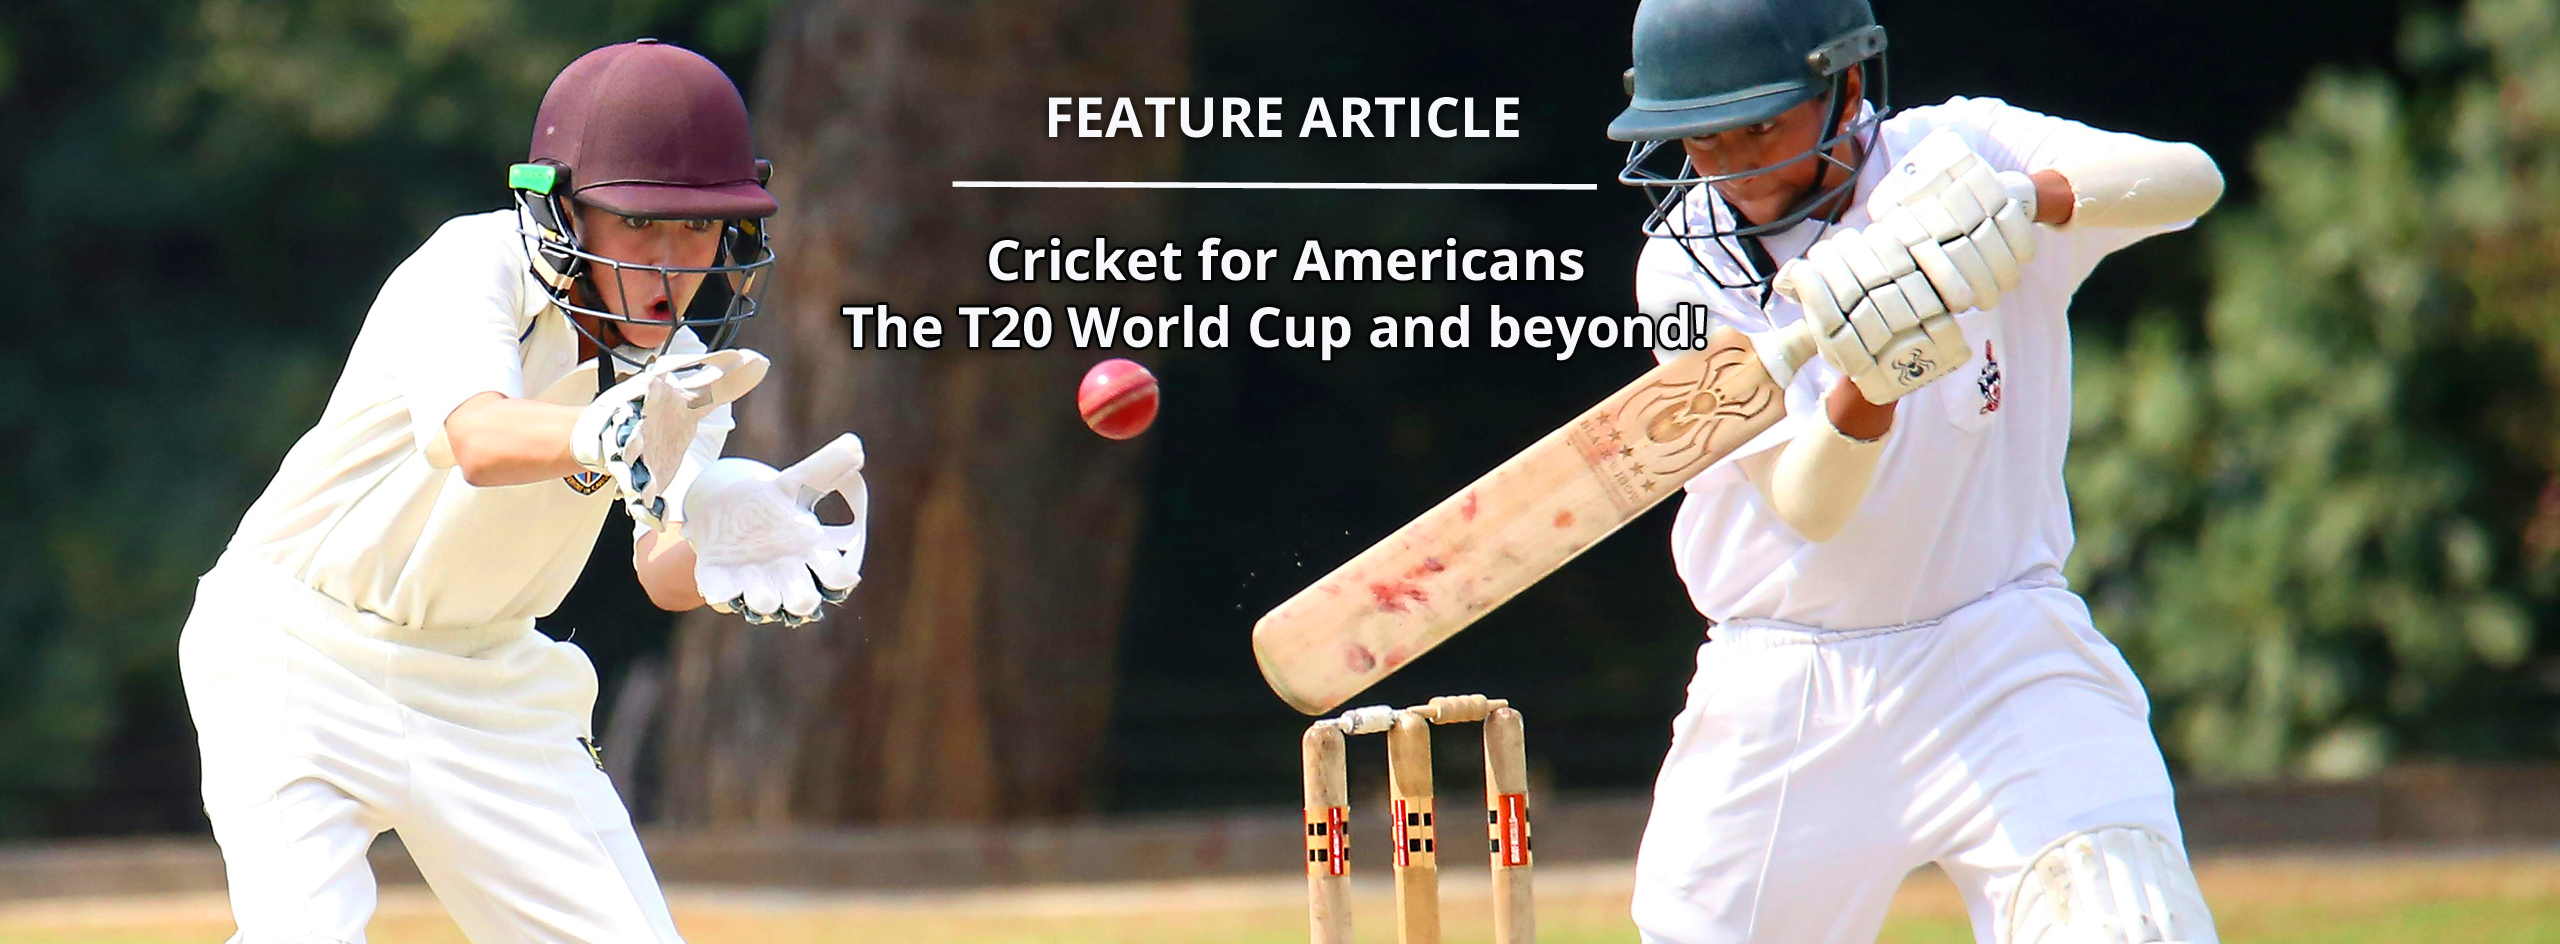 Triprovider Cricket For Americans T20 World Cup Header